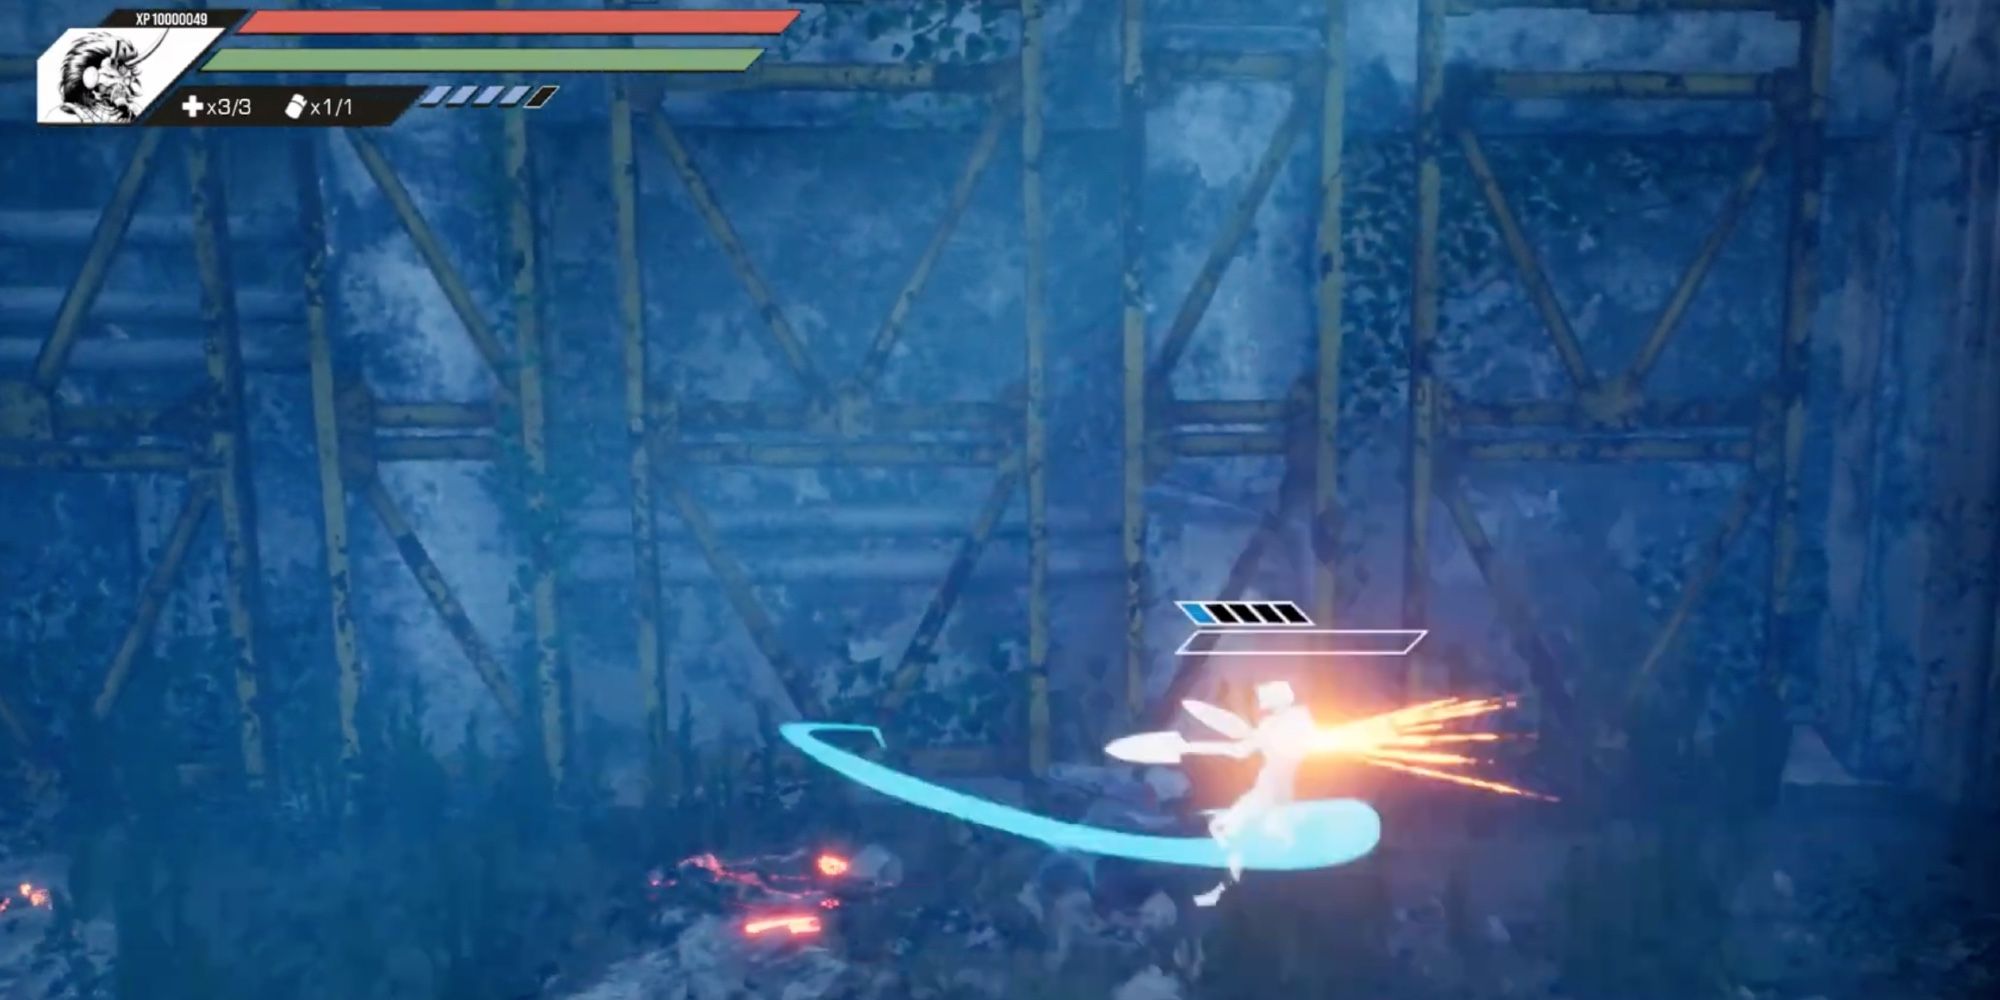 The player uses combos to destroy enemies in the game